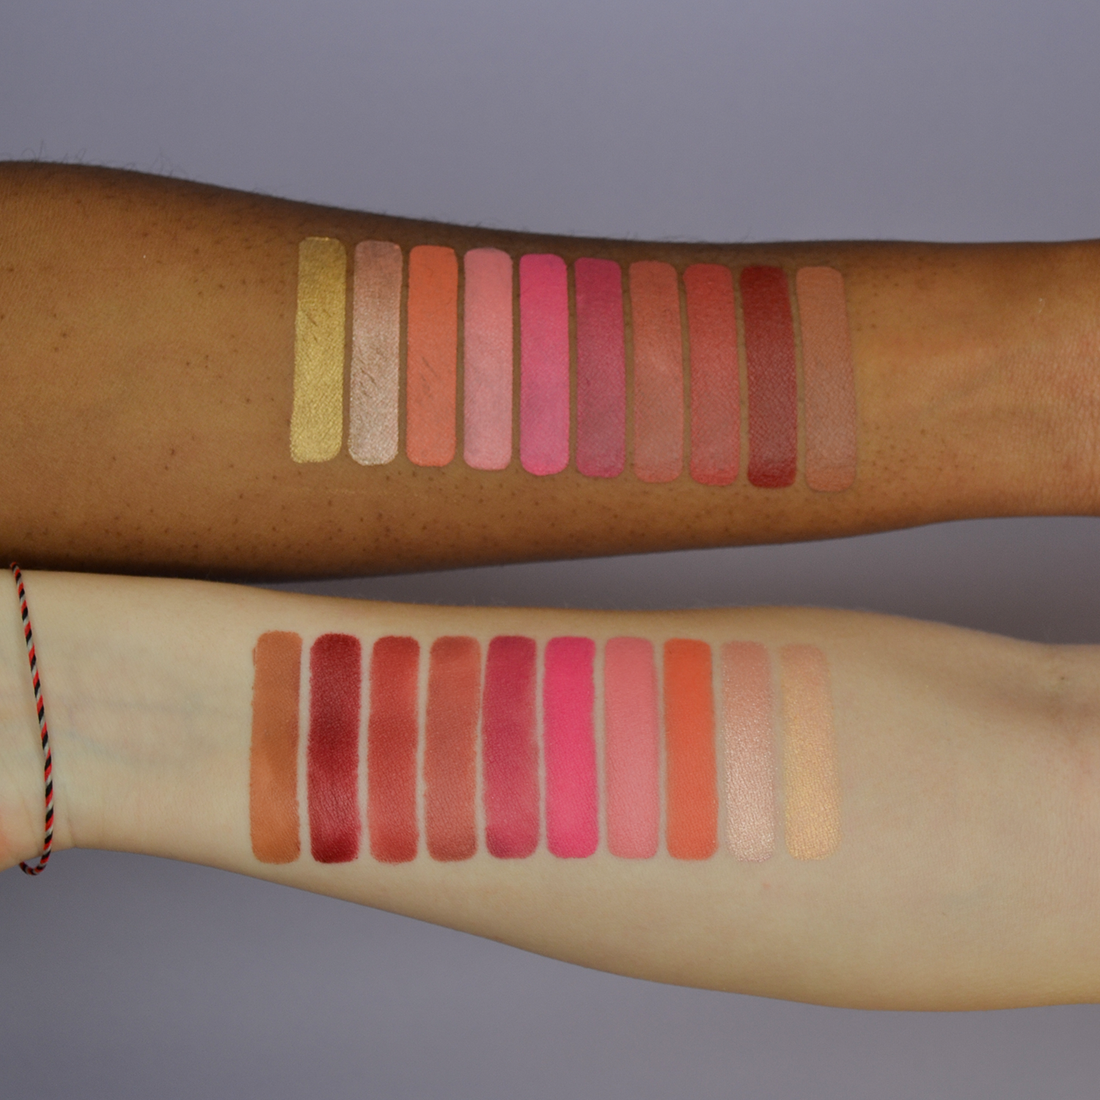 Swatches for the Dare to Blush heart-shaped blush stick on two arms, one with darker skin and one with fair skin